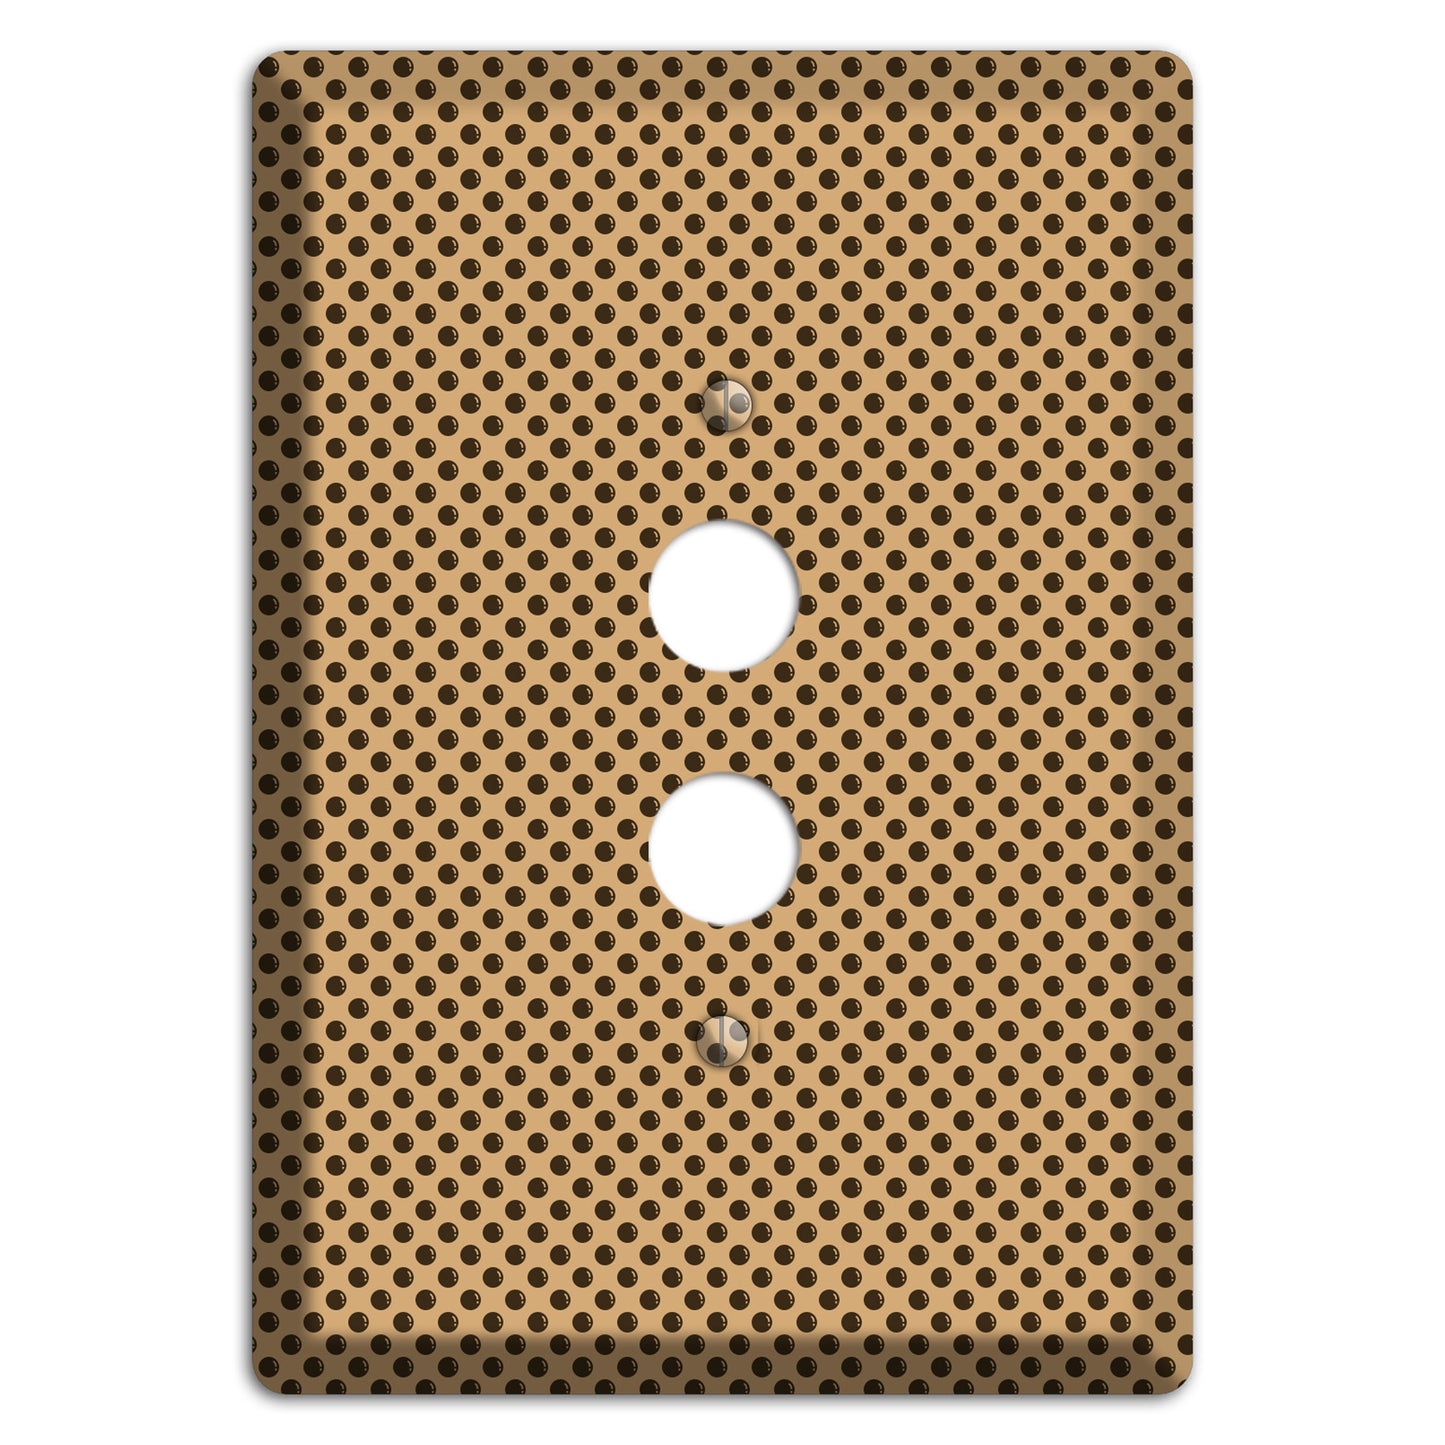 Beige with Brown Polka Dots 1 Pushbutton Wallplate